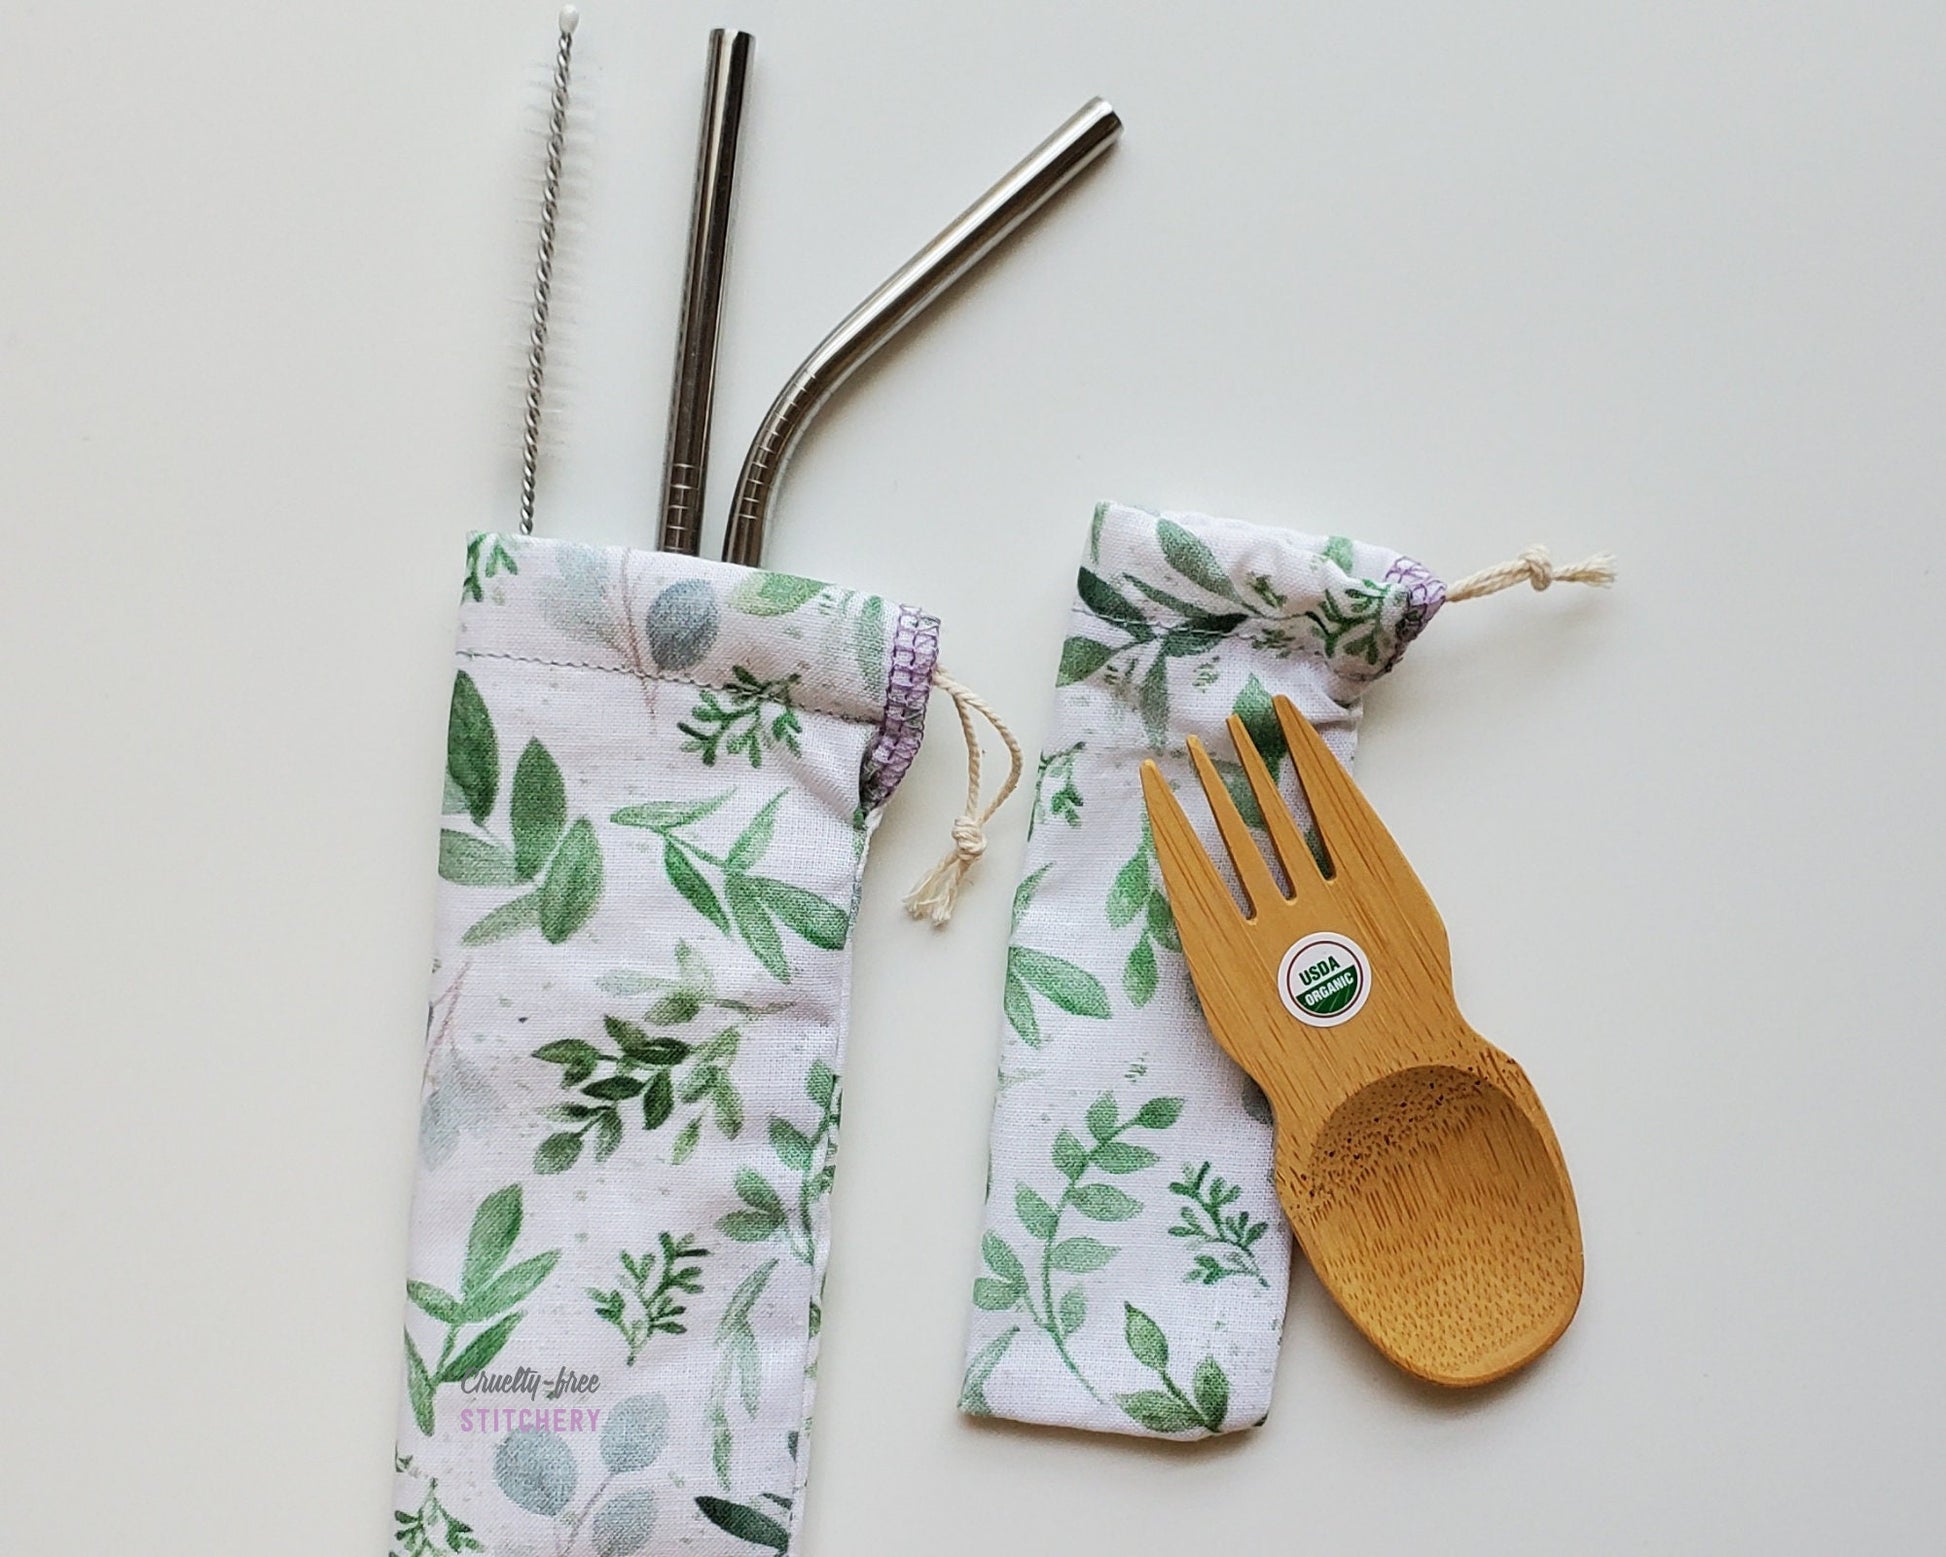 Reusable bamboo spork and straw pouch set. The pouches are both a white fabric with green eucalyptus leaves printed on.